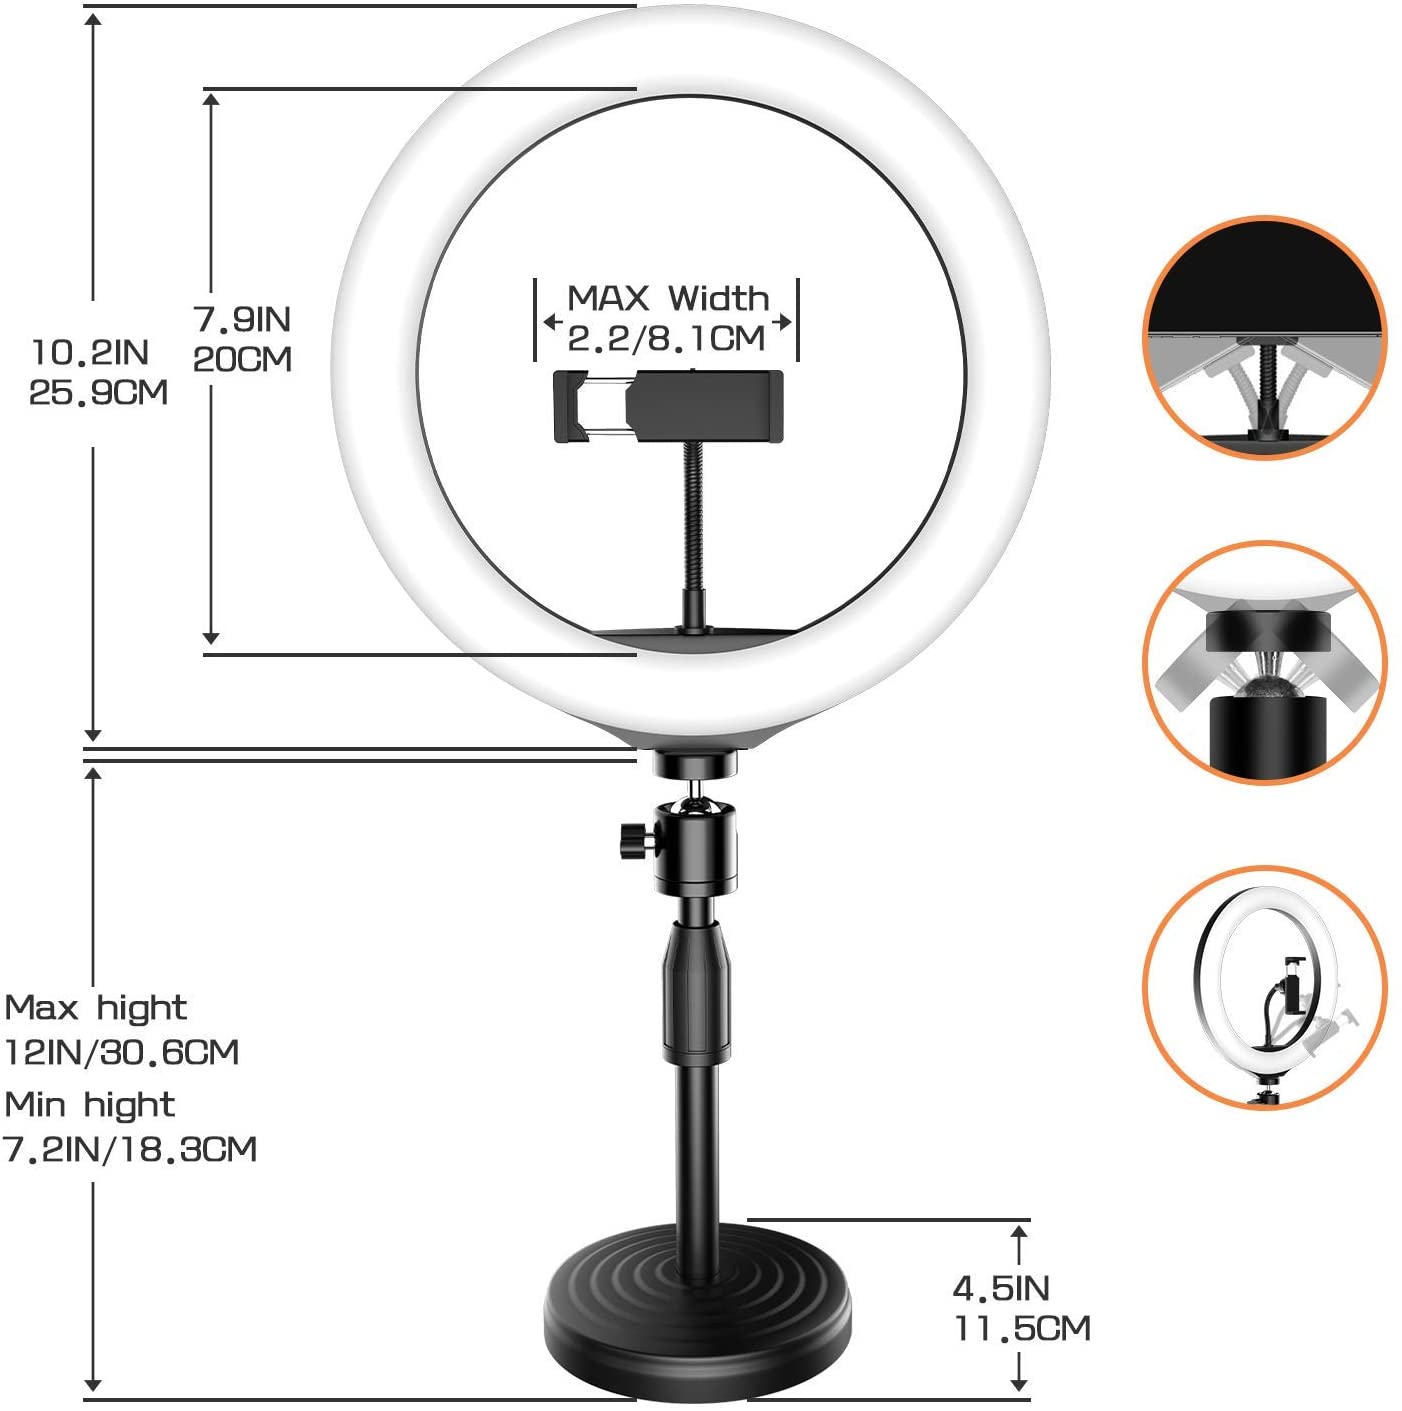 Jeemak PC50 10.2 inch selfie ring light with base and mobile phone holder